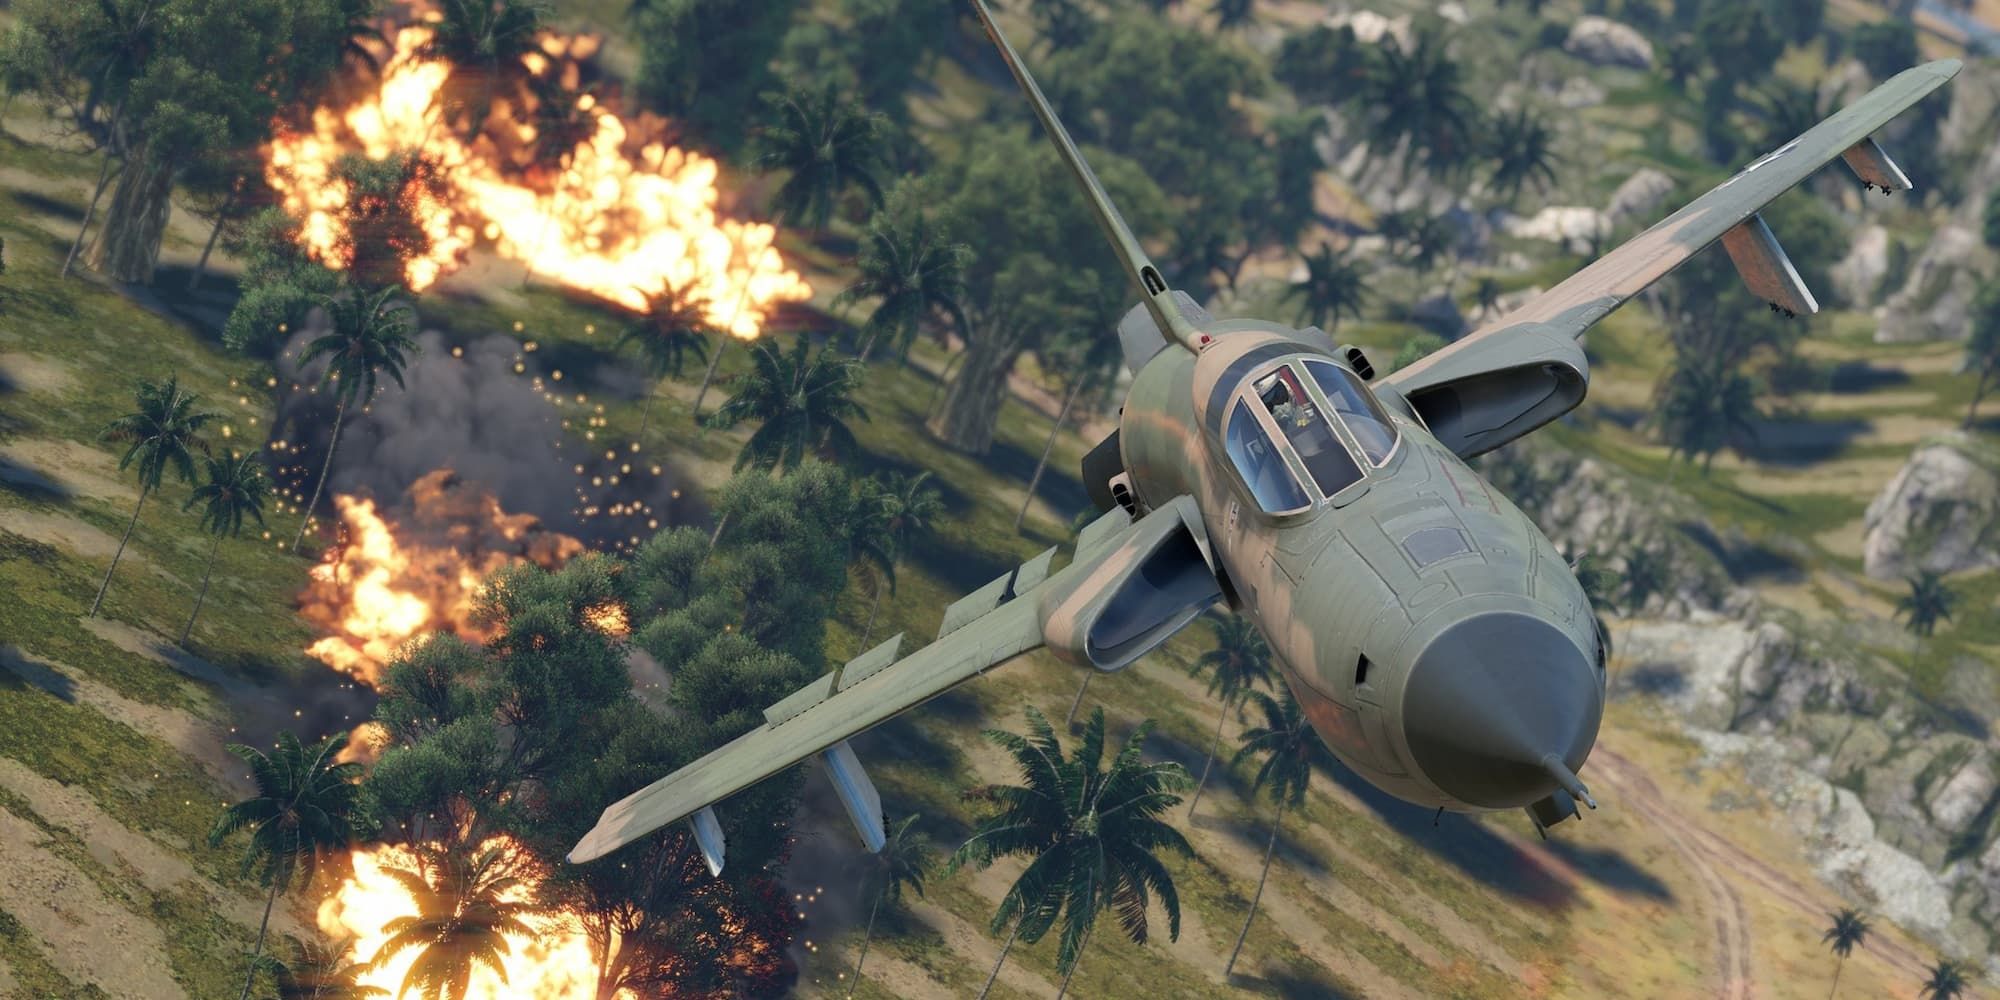 A fighter plane flies over palm trees after completing a bombing run in War Thunder.